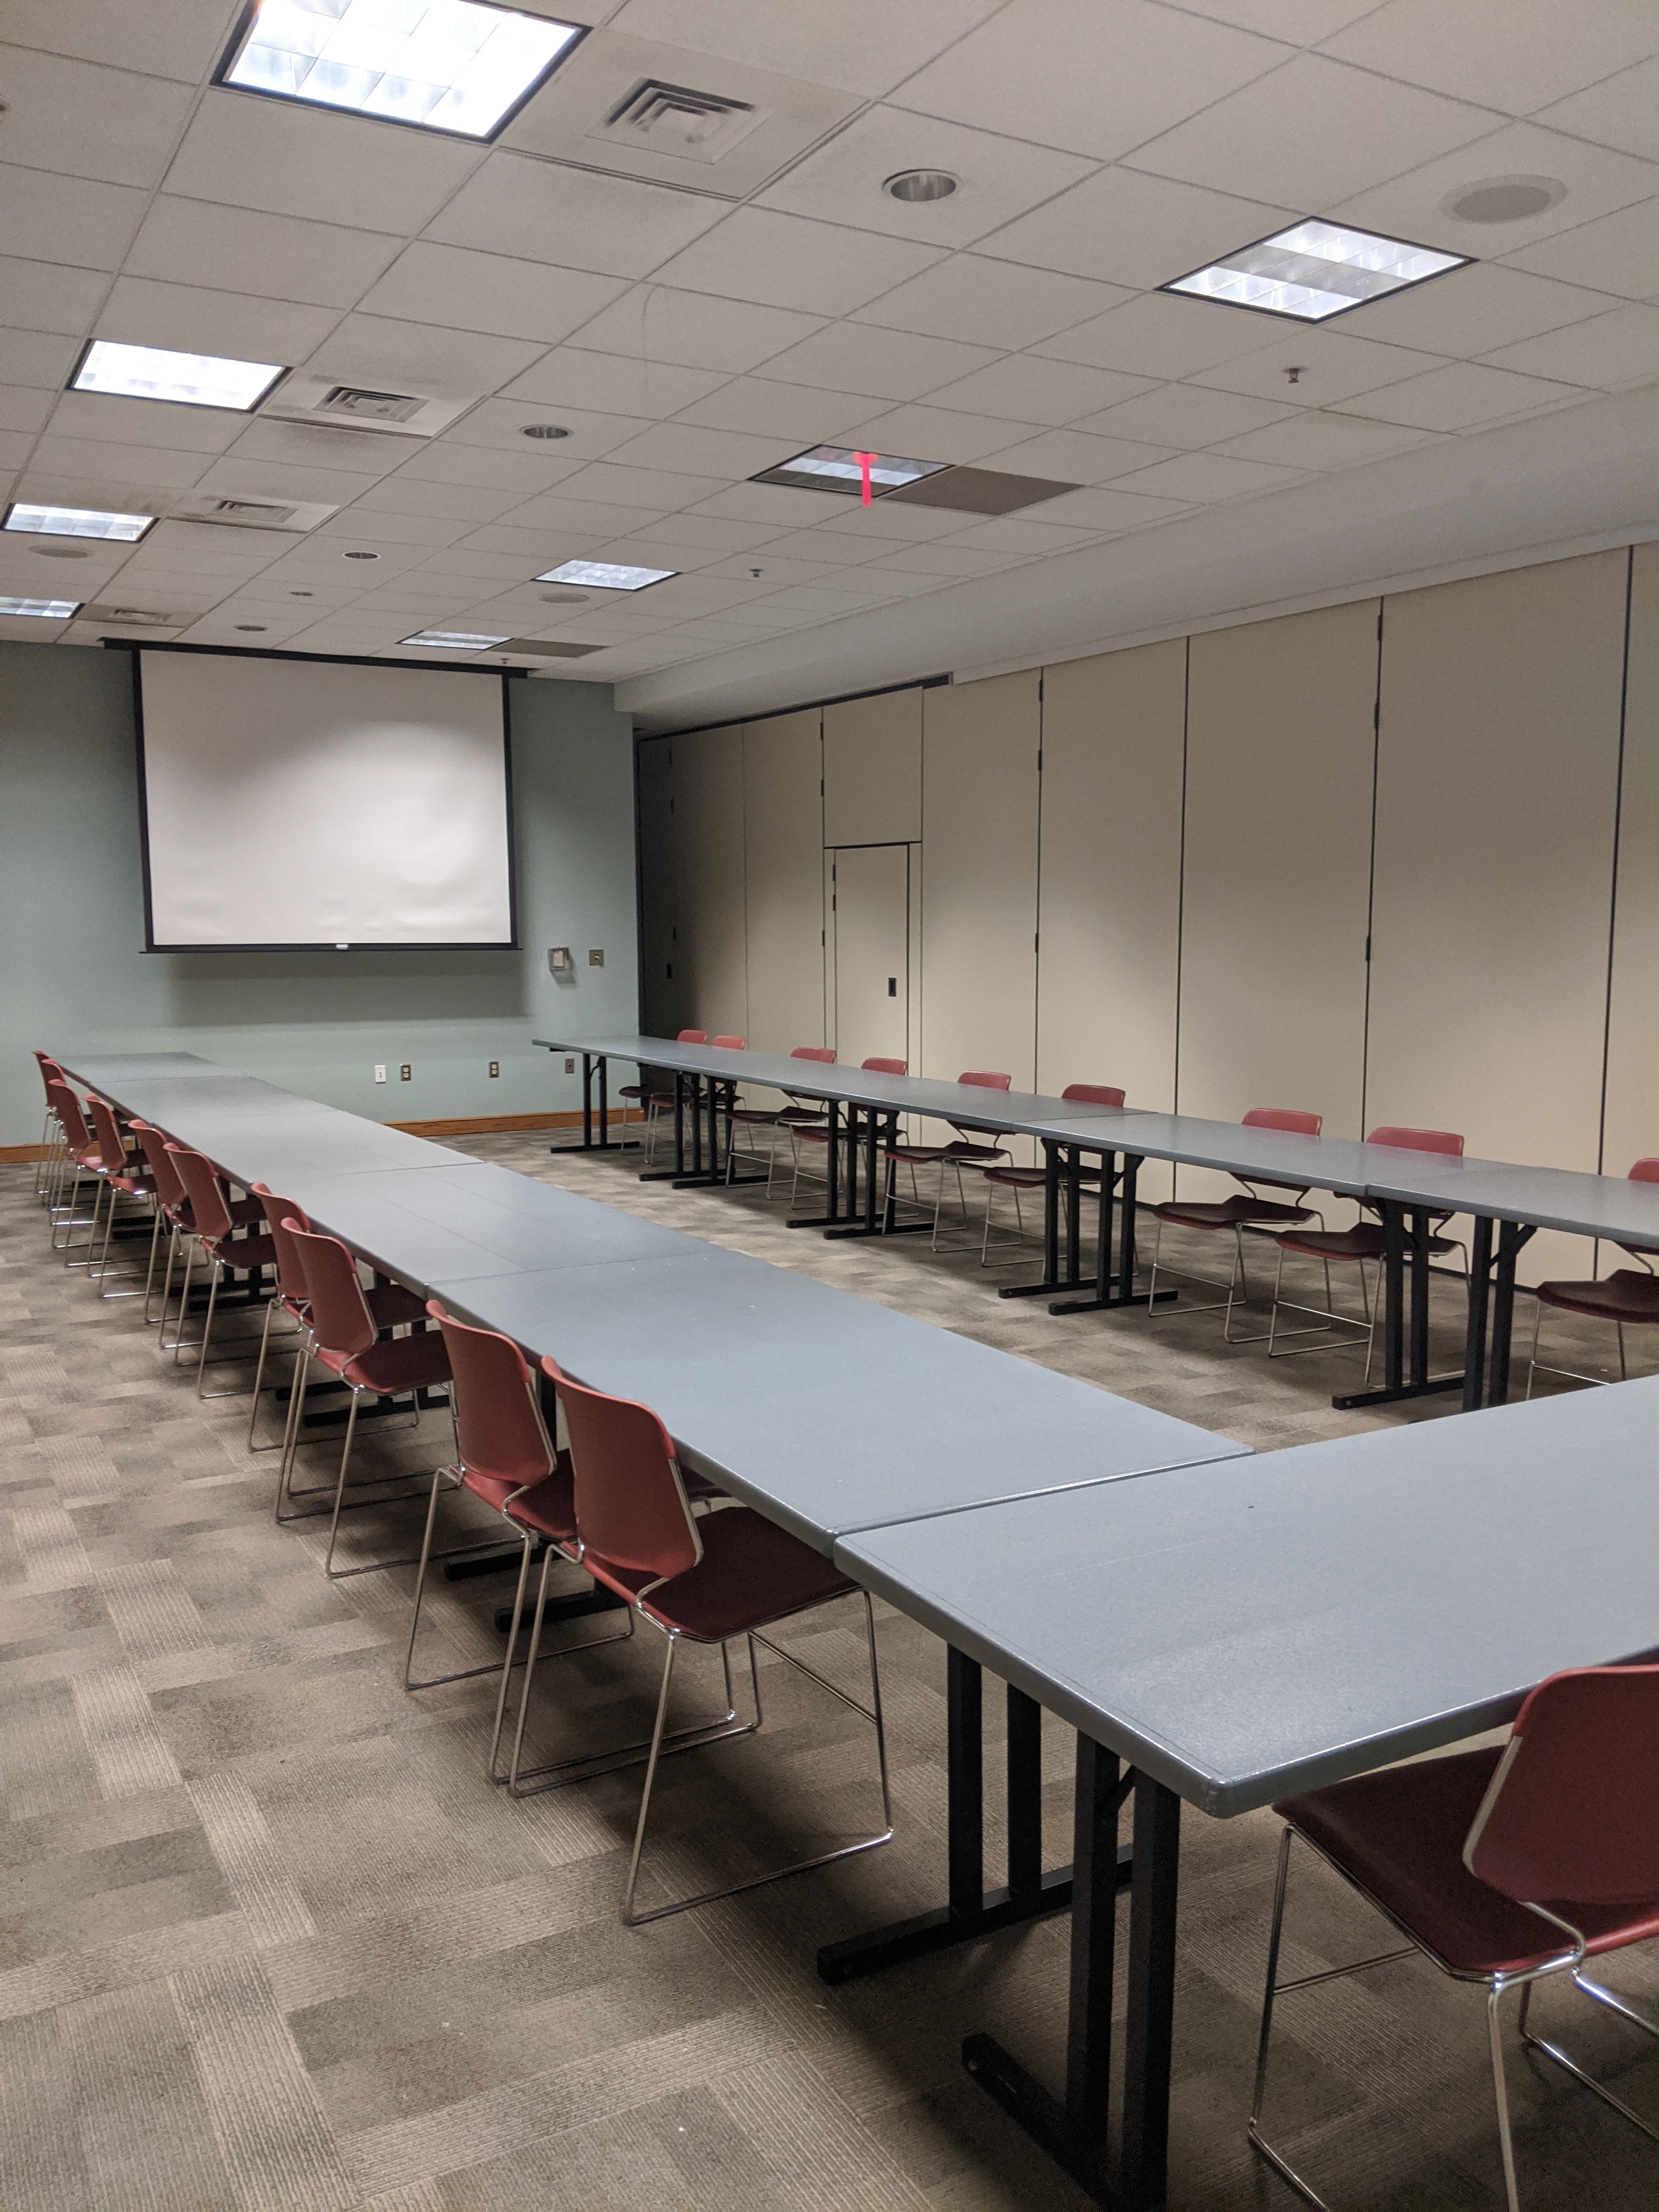 Photo of Multipurpose Room A with tables arranged in a U-shape facing  projector screen